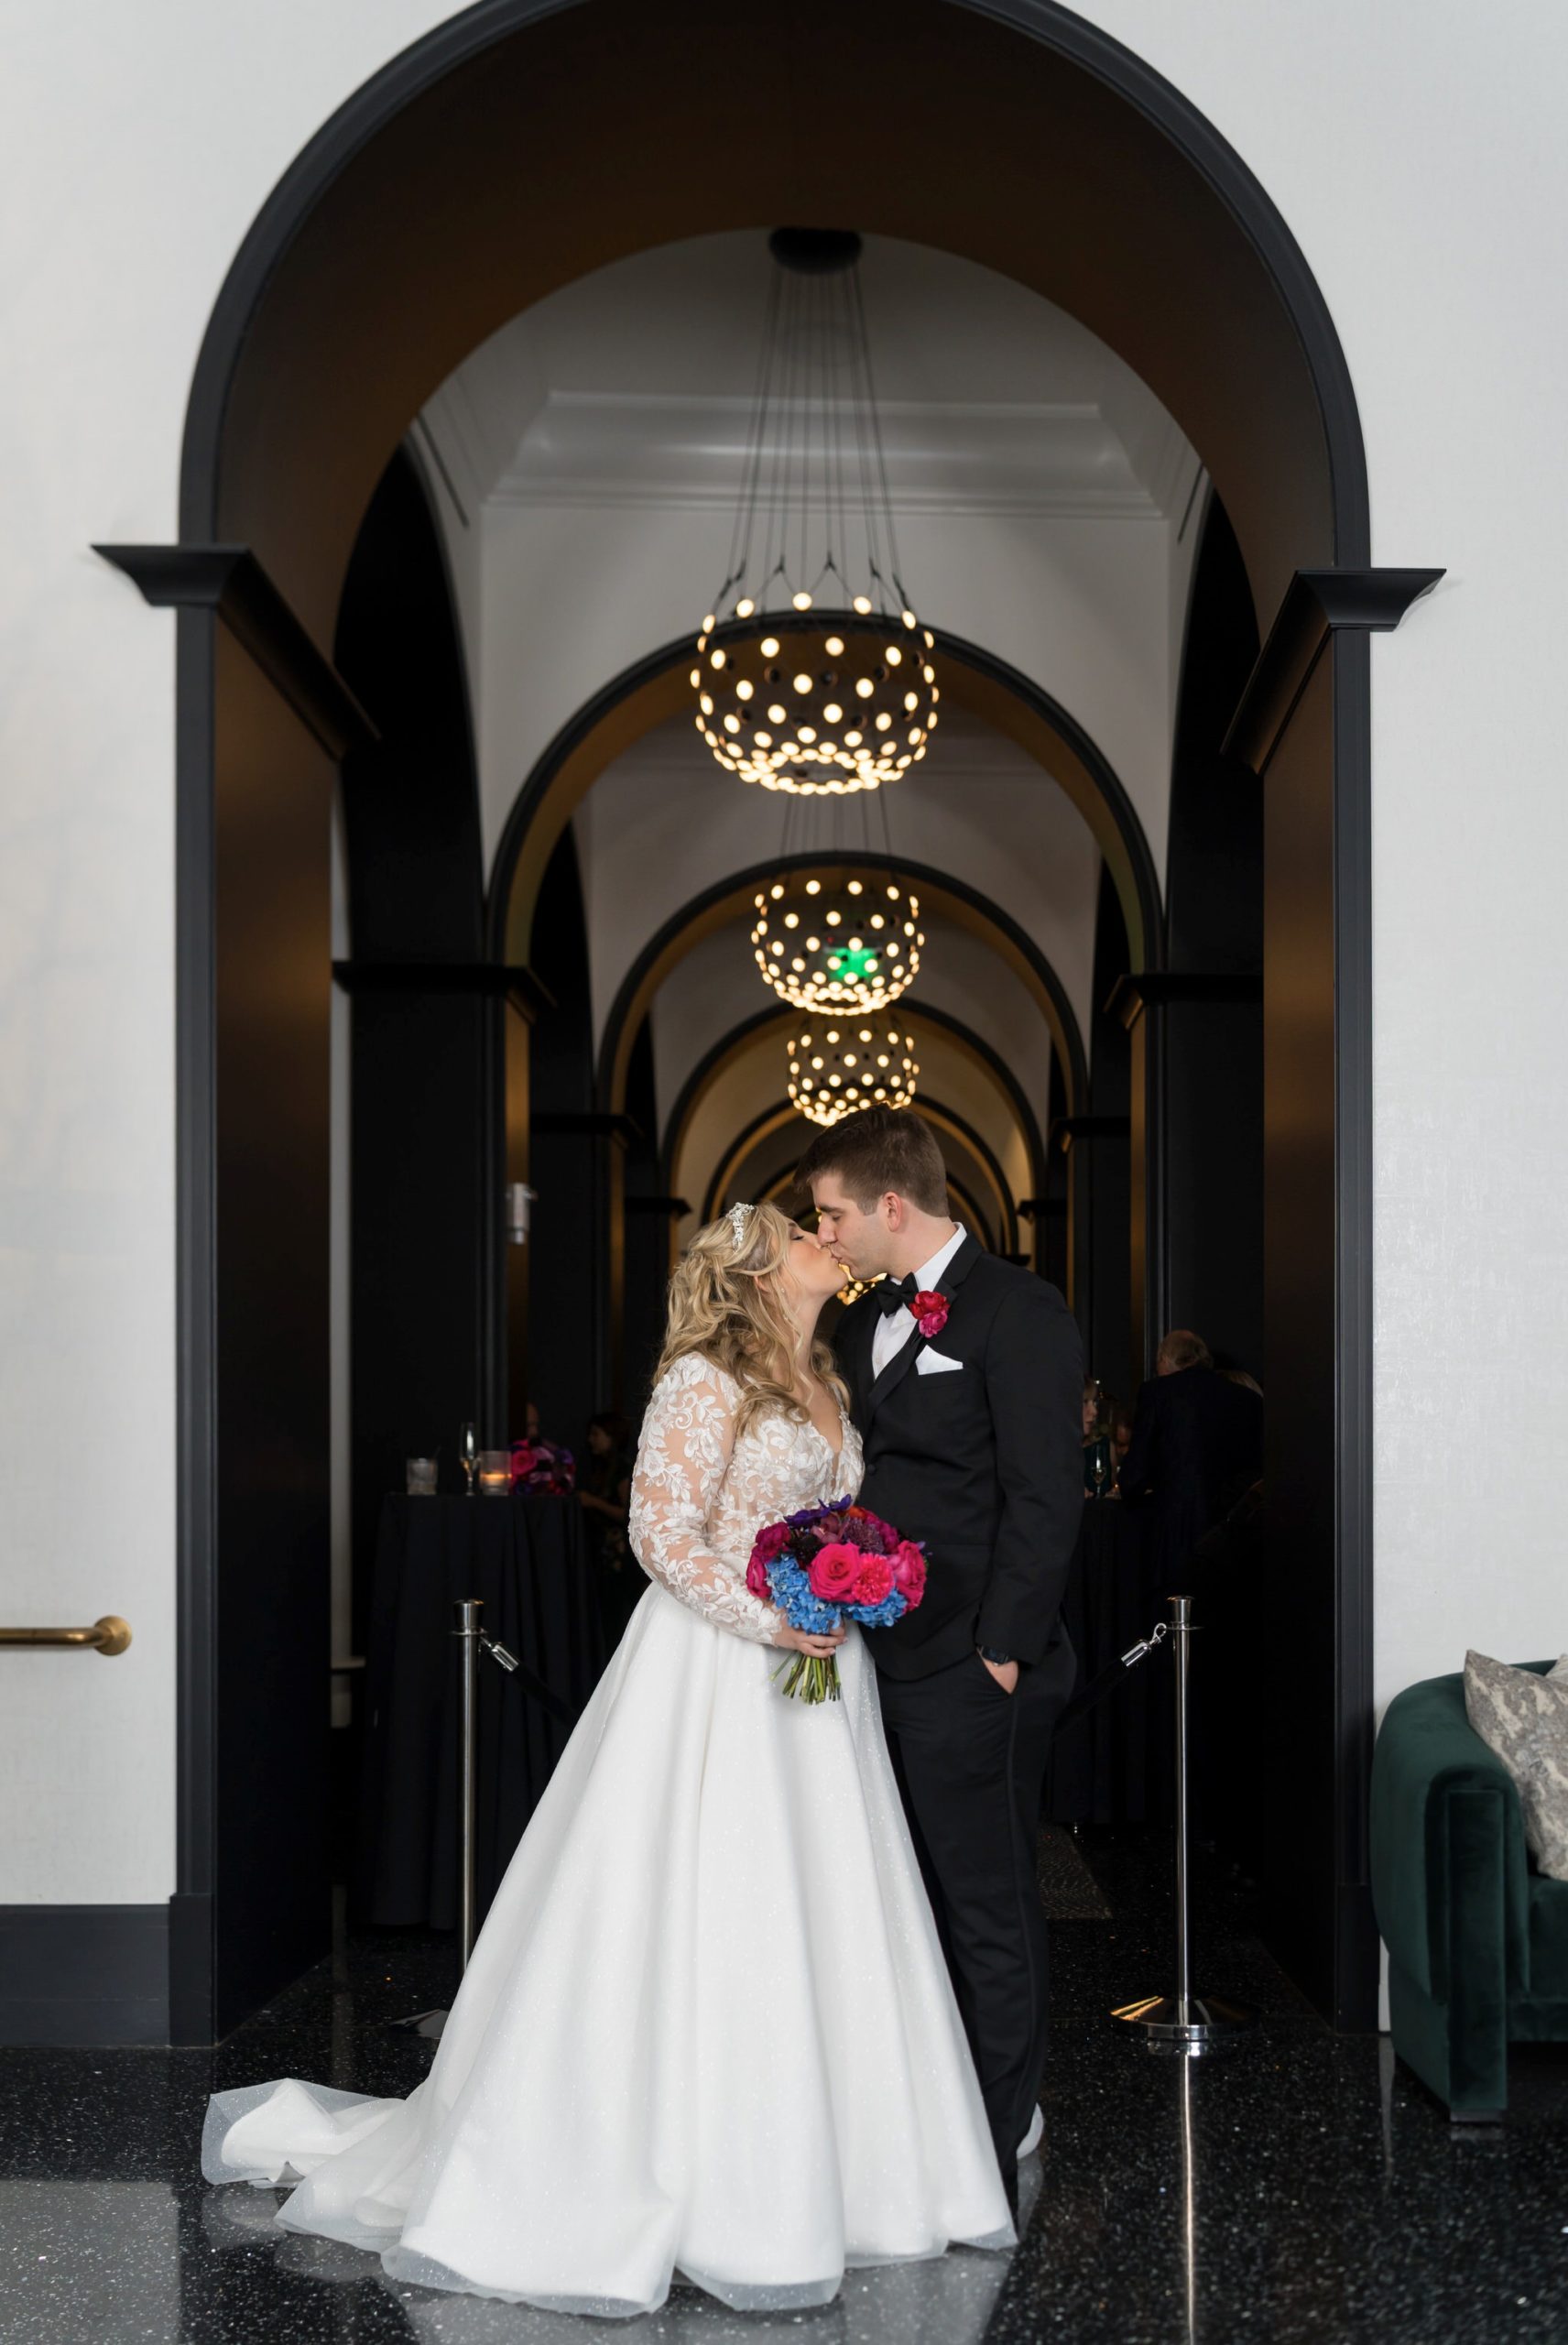 A groom kisses the bride with golden chandeliers behind them at their Daxton Hotel wedding.  